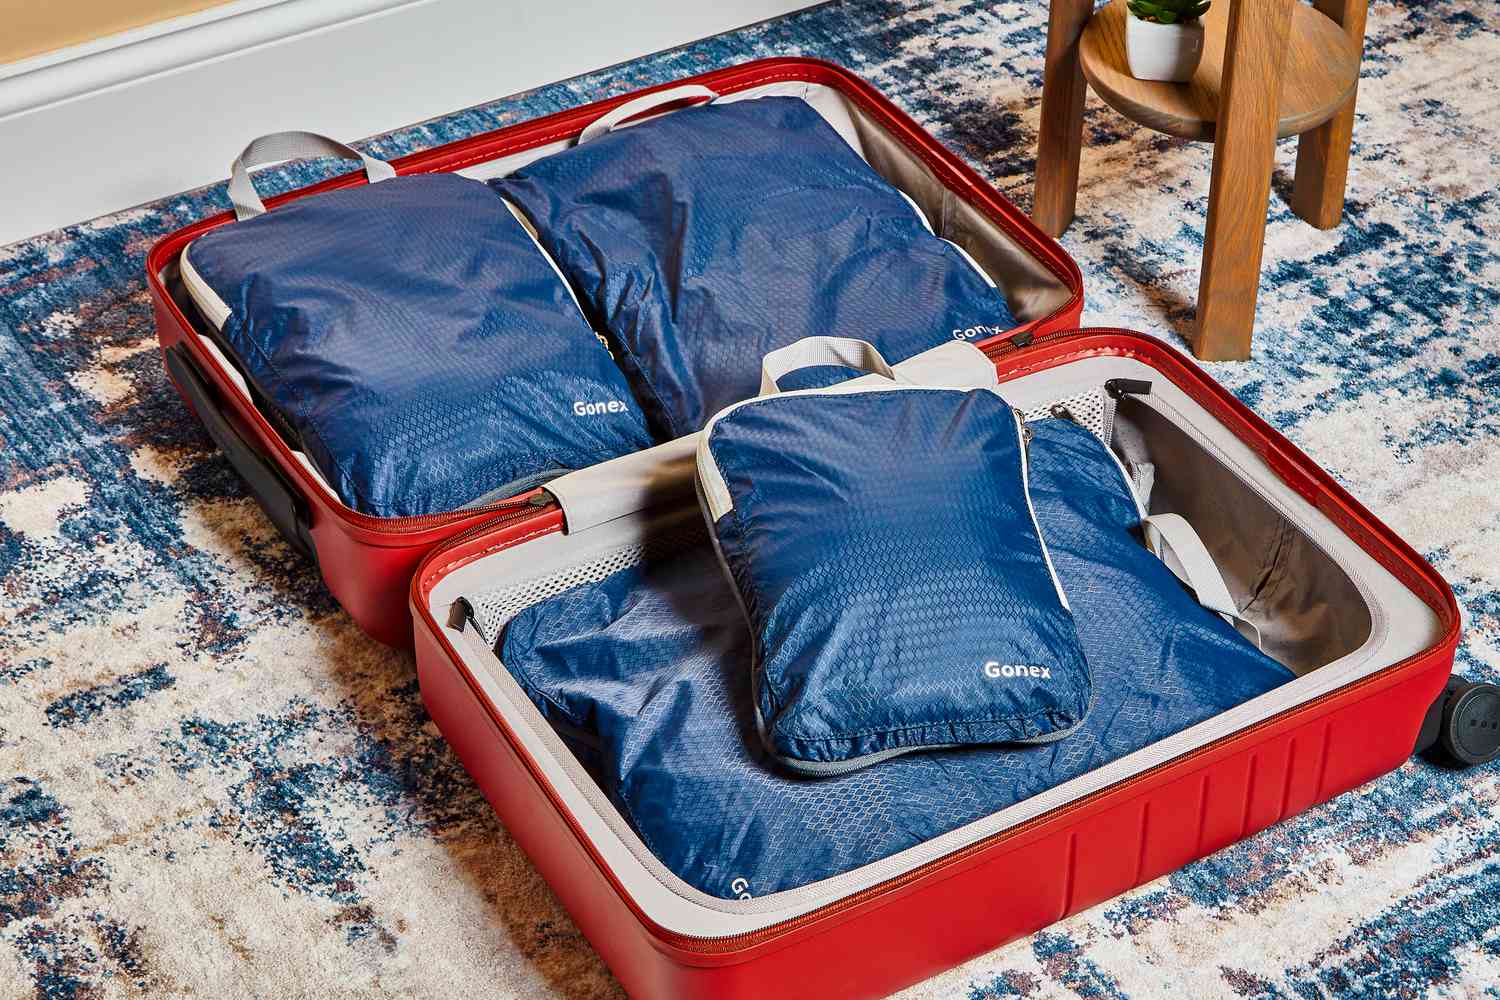 Set of blue Gonex Compression Packing Cubes packed in a red suitcase on a blue print rug